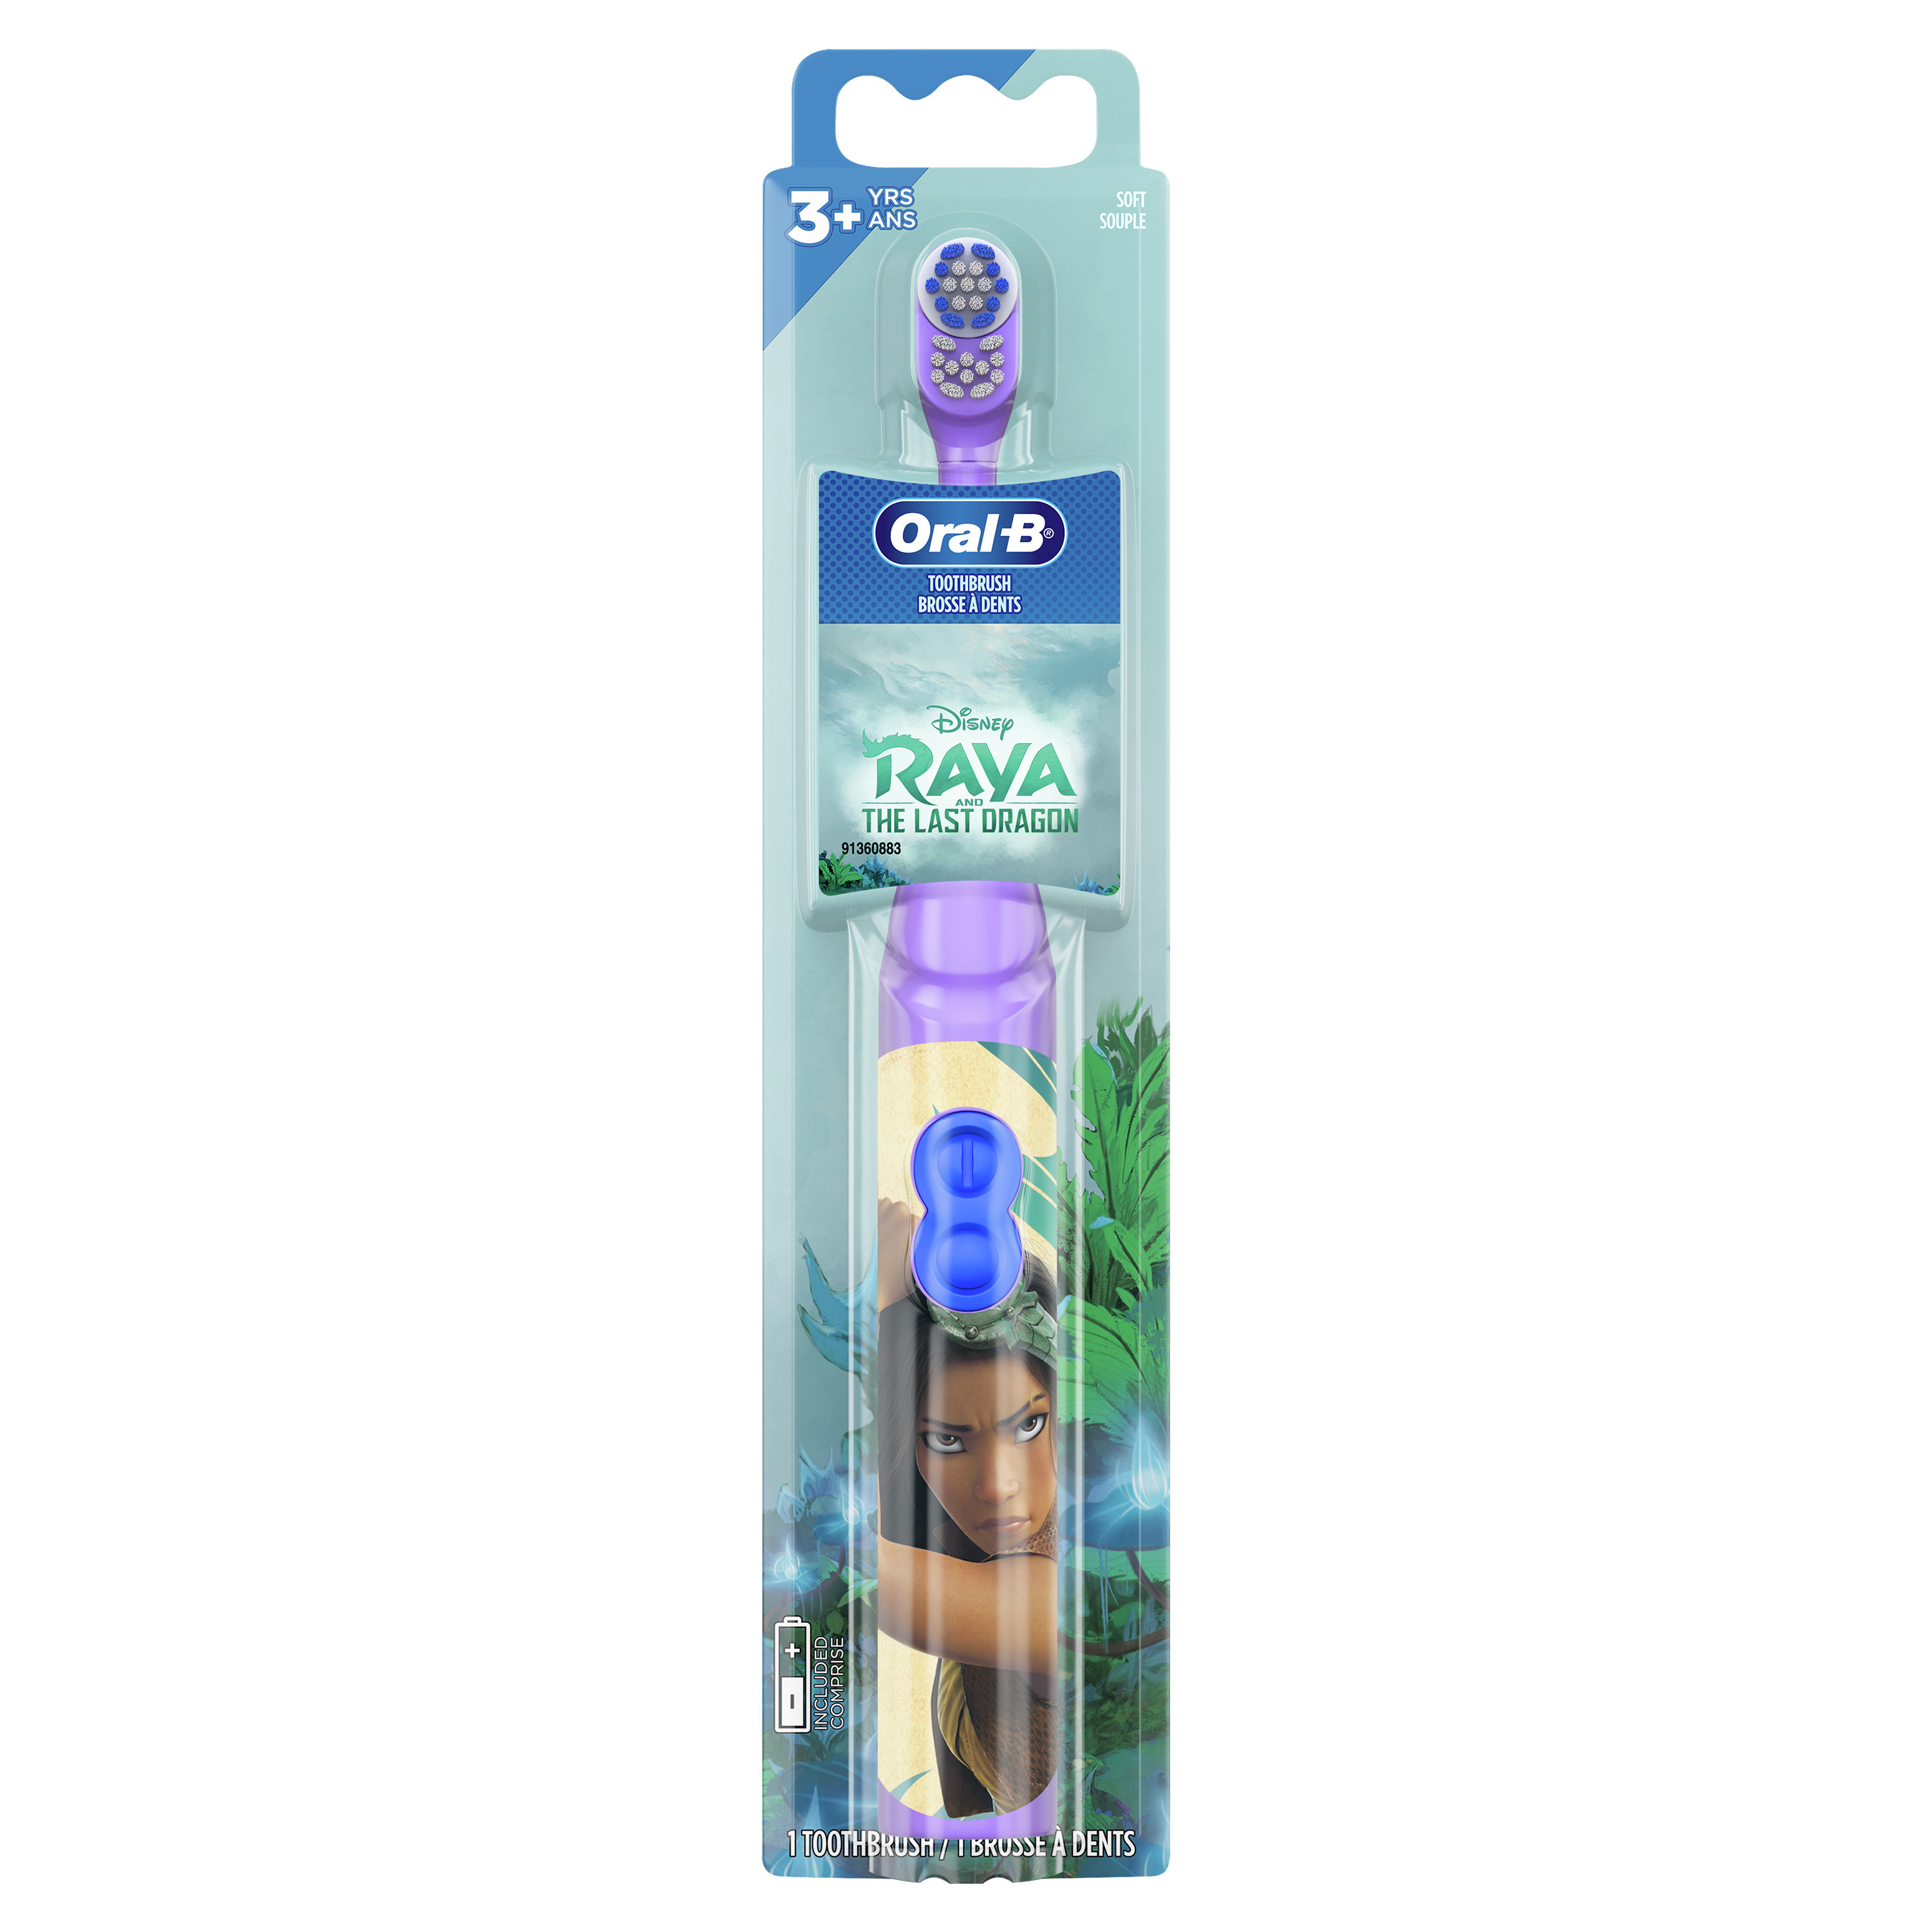 Oral-B Kid's Disney's Raya & the Last Dragon Battery Electric Toothbrush, Soft - image 1 of 8